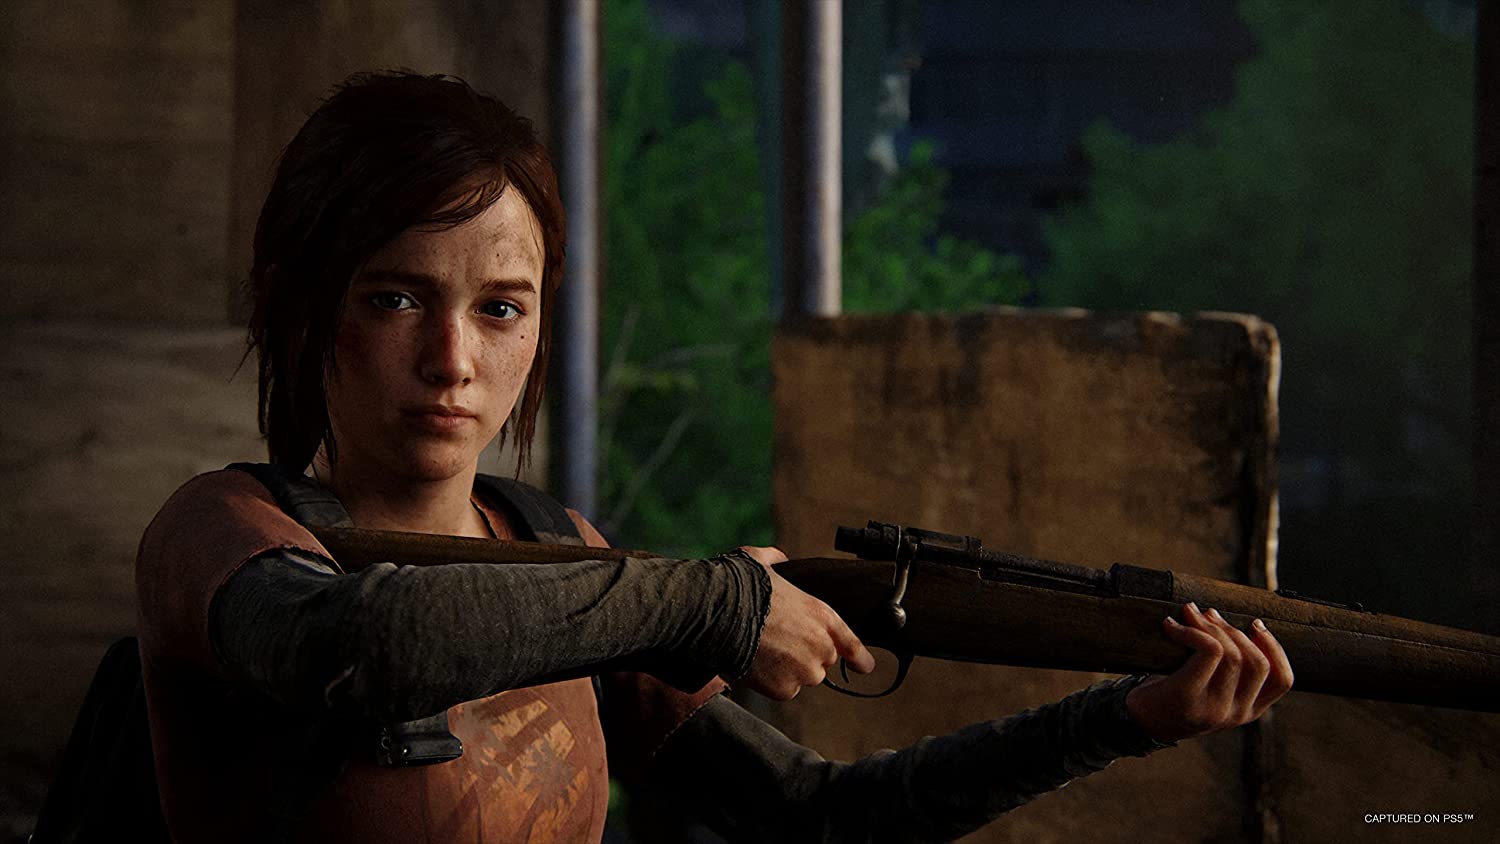 Ellie wields a crossbow in the remake of The Last of Us part 1